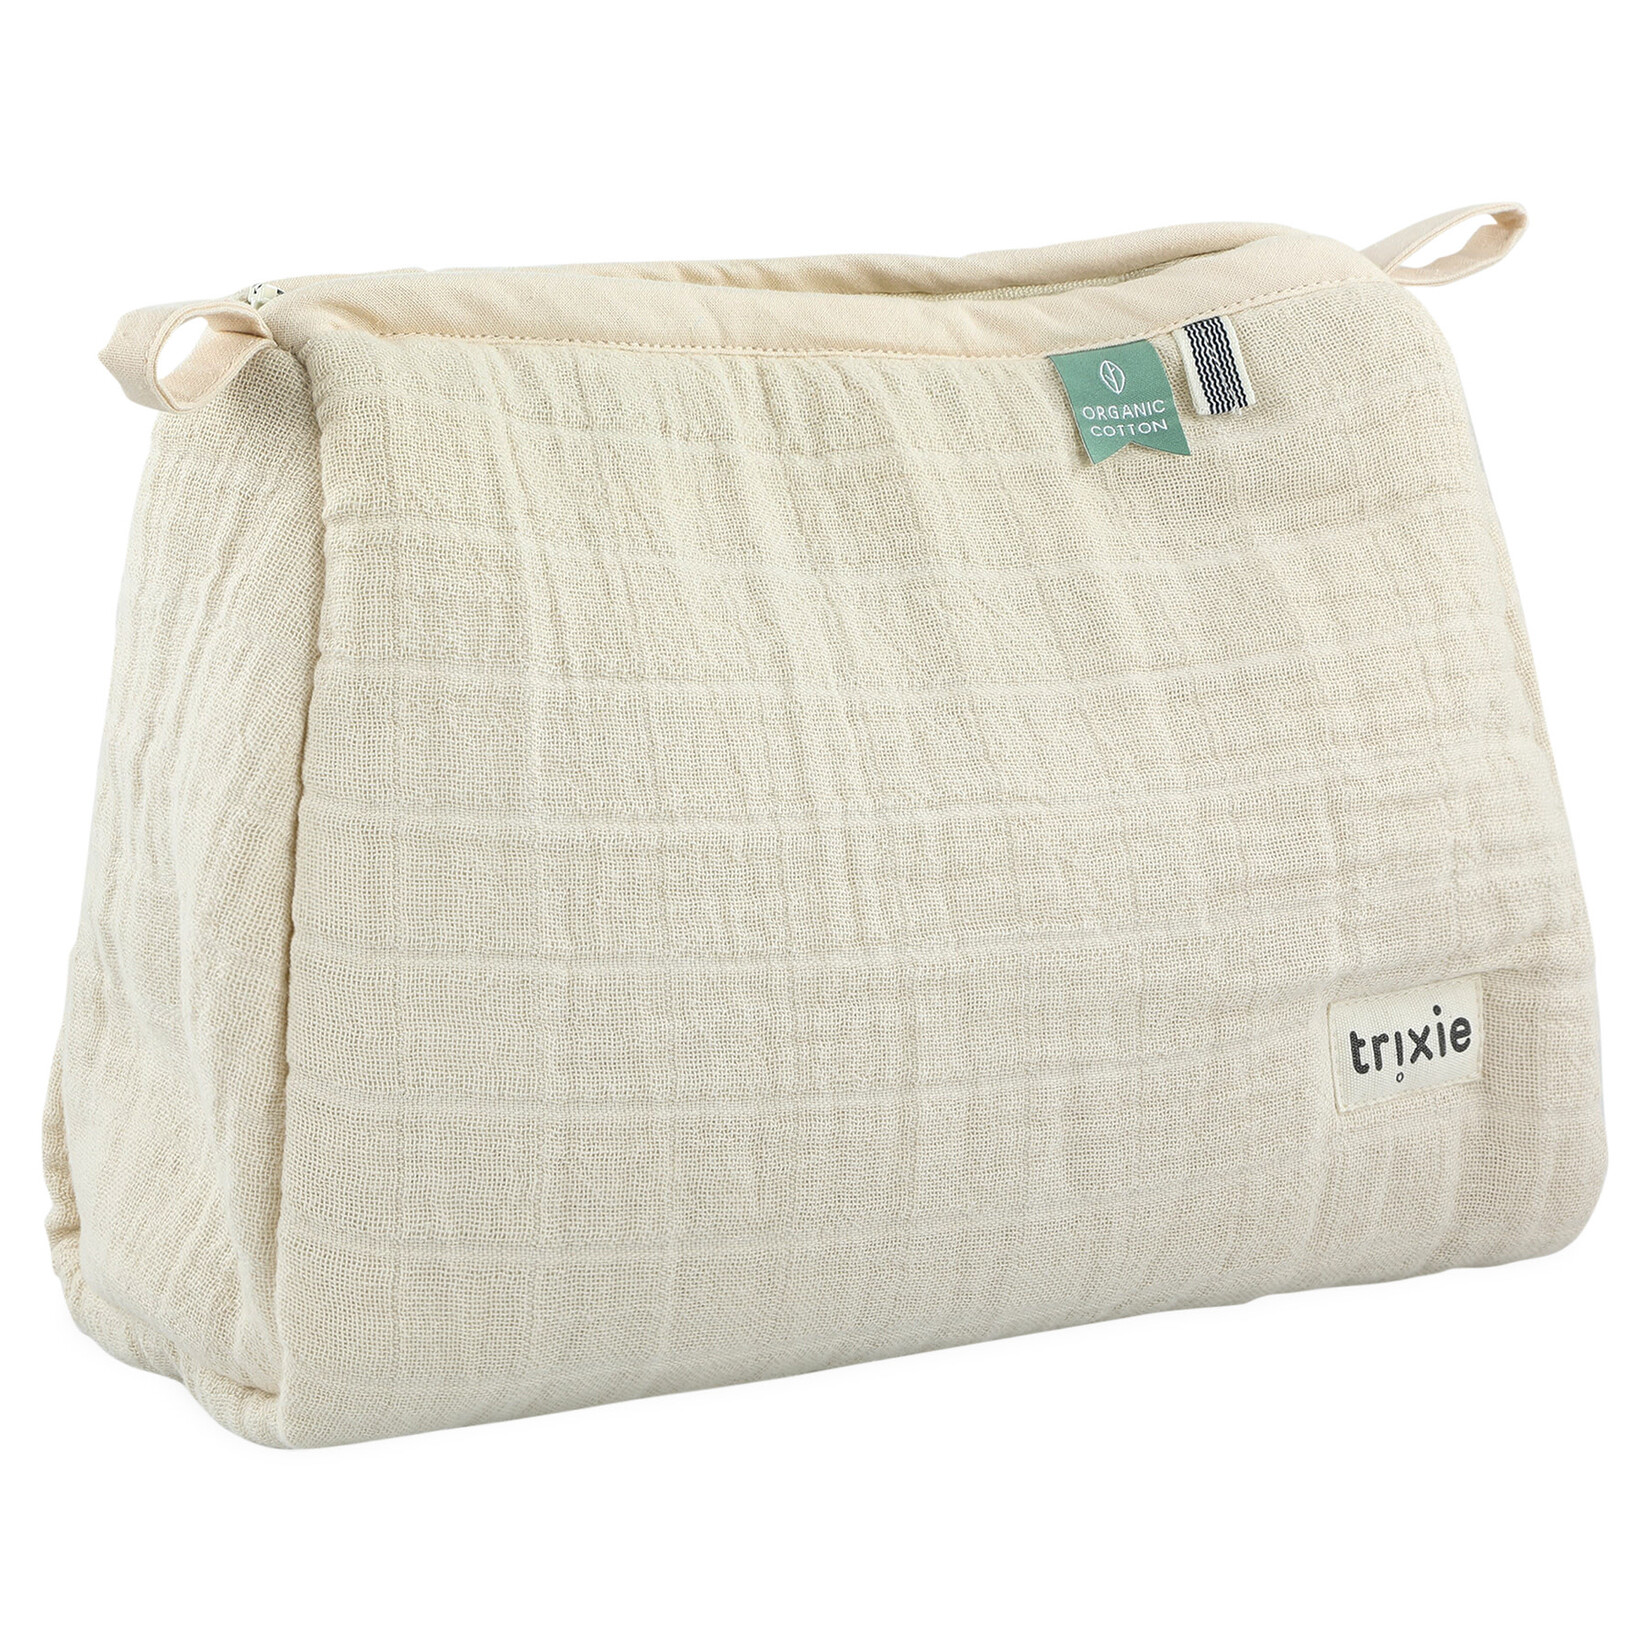 Trixie Toiletry bag - Bliss Beige